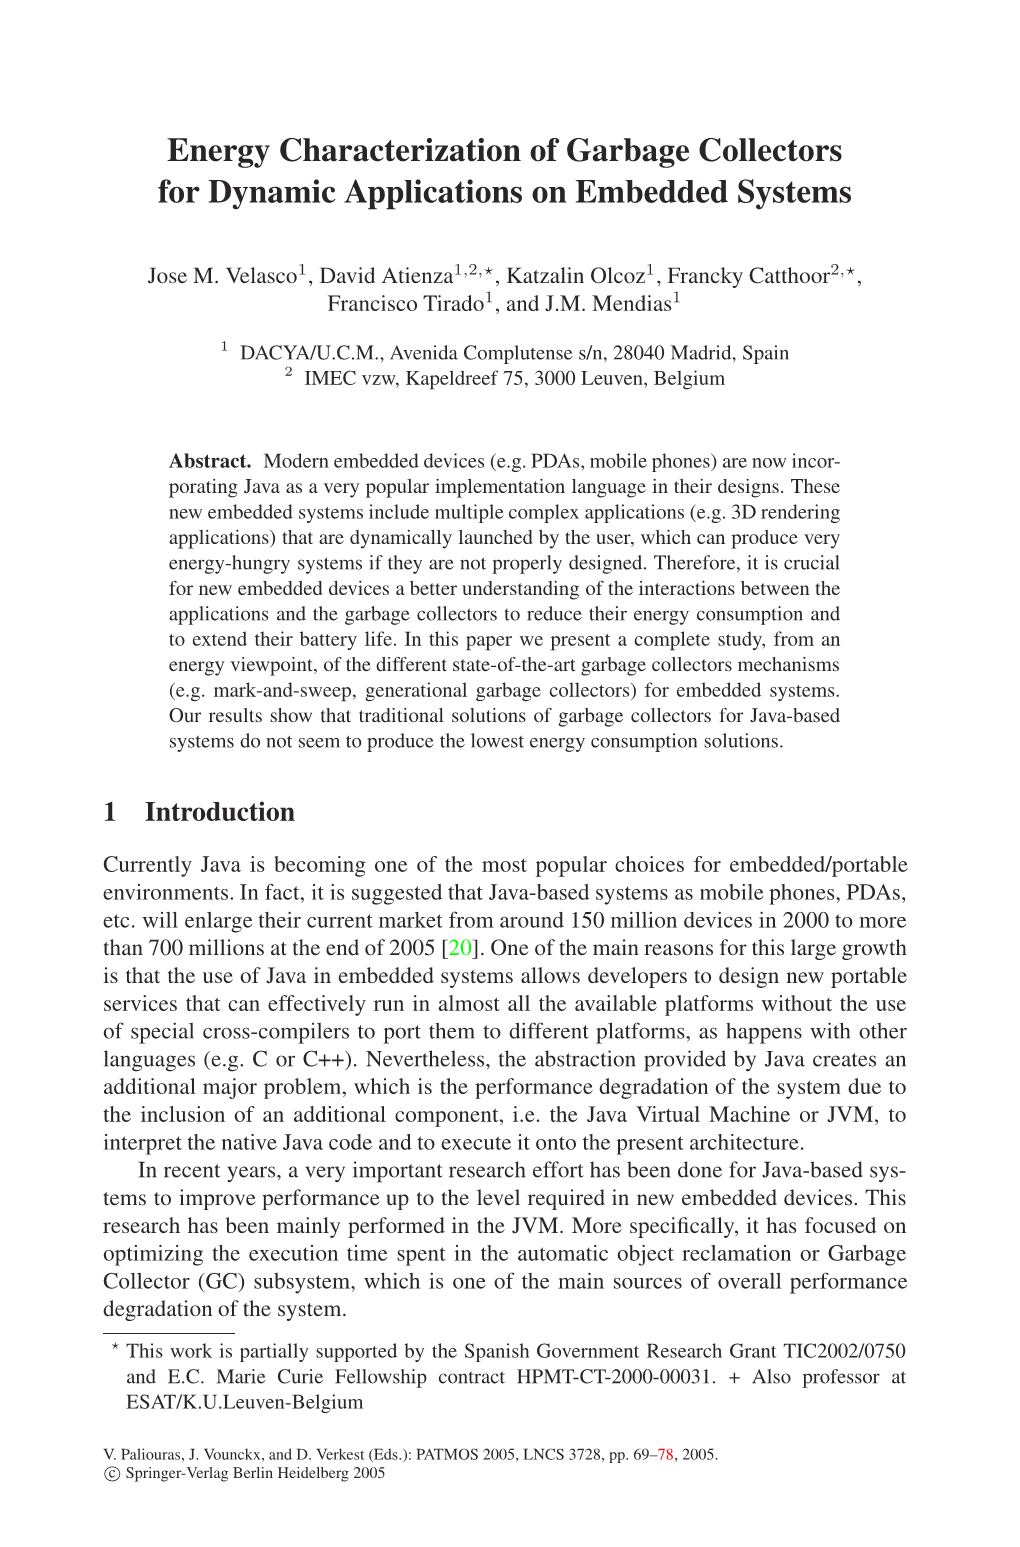 Energy Characterization of Garbage Collectors for Dynamic Applications on Embedded Systems